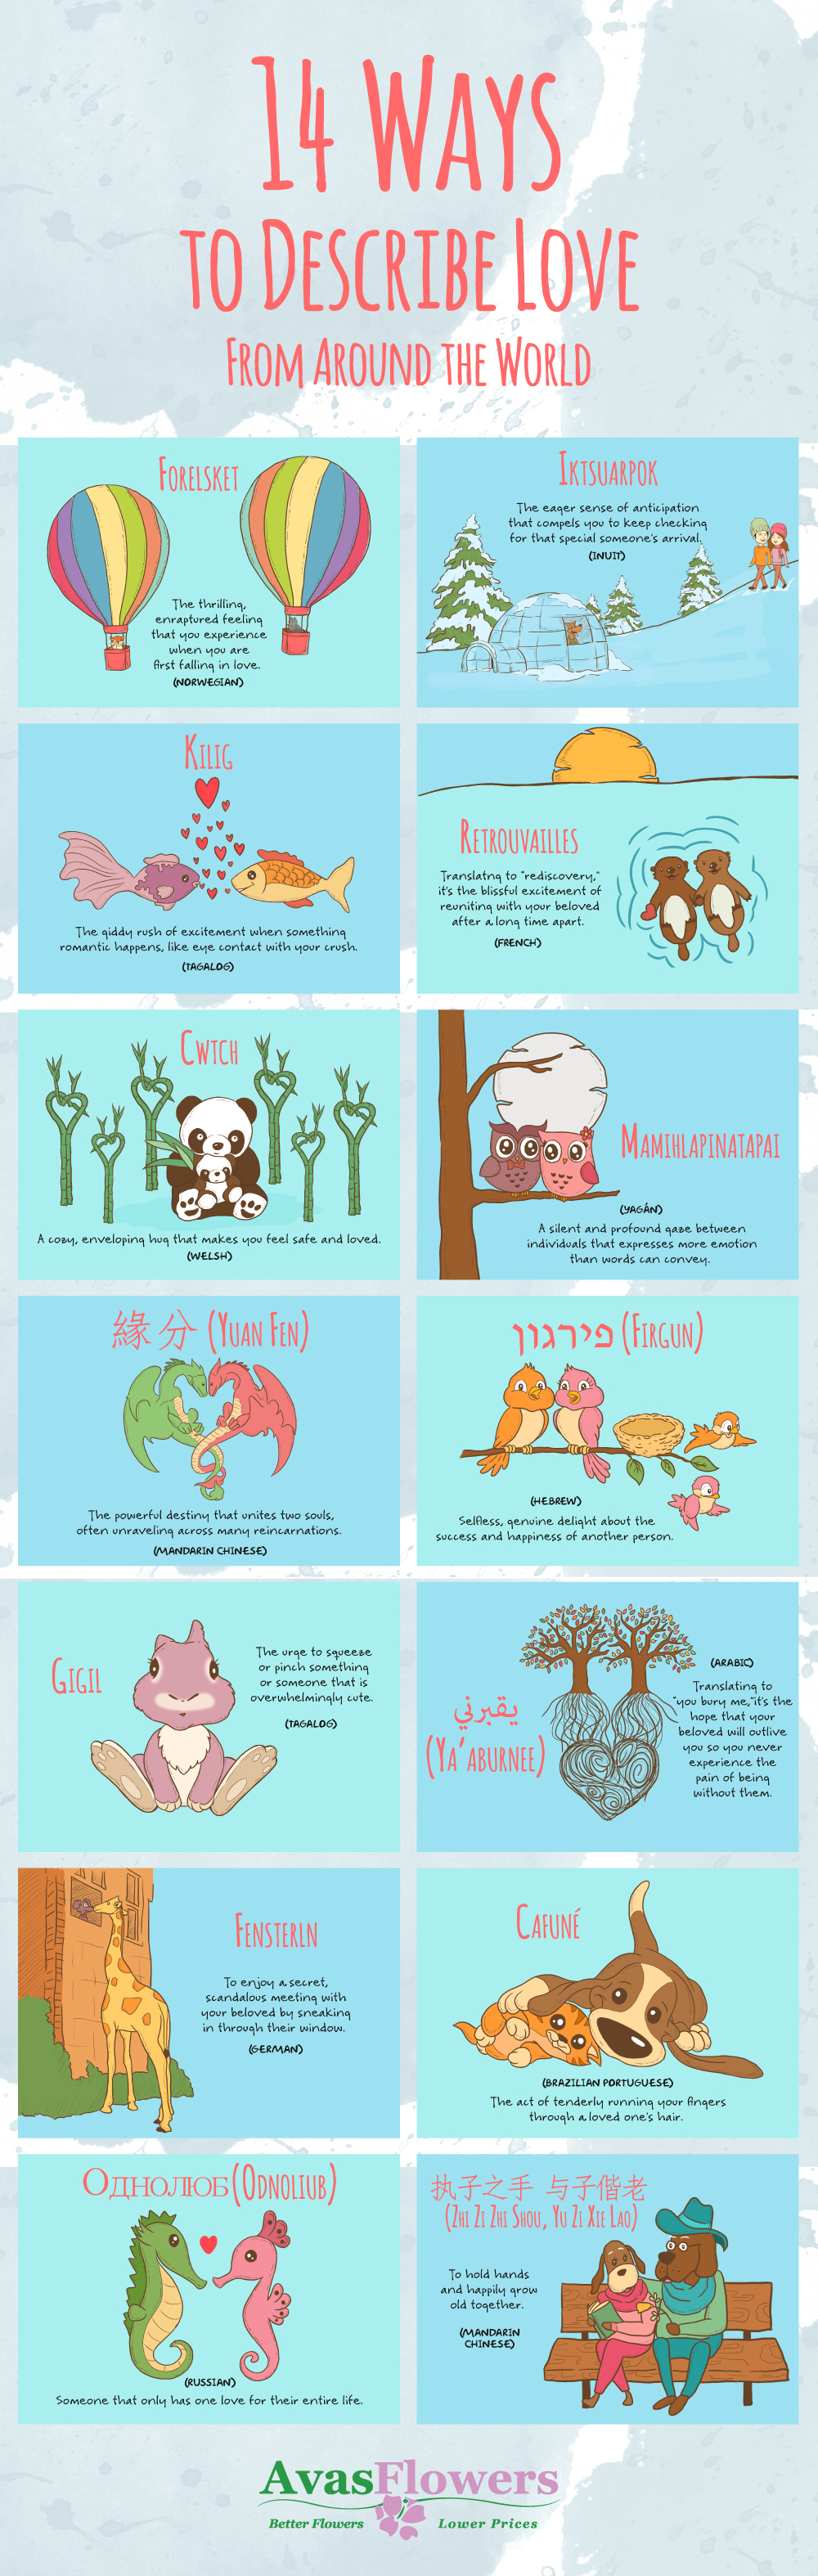 14 Ways to Describe Love From Around the World